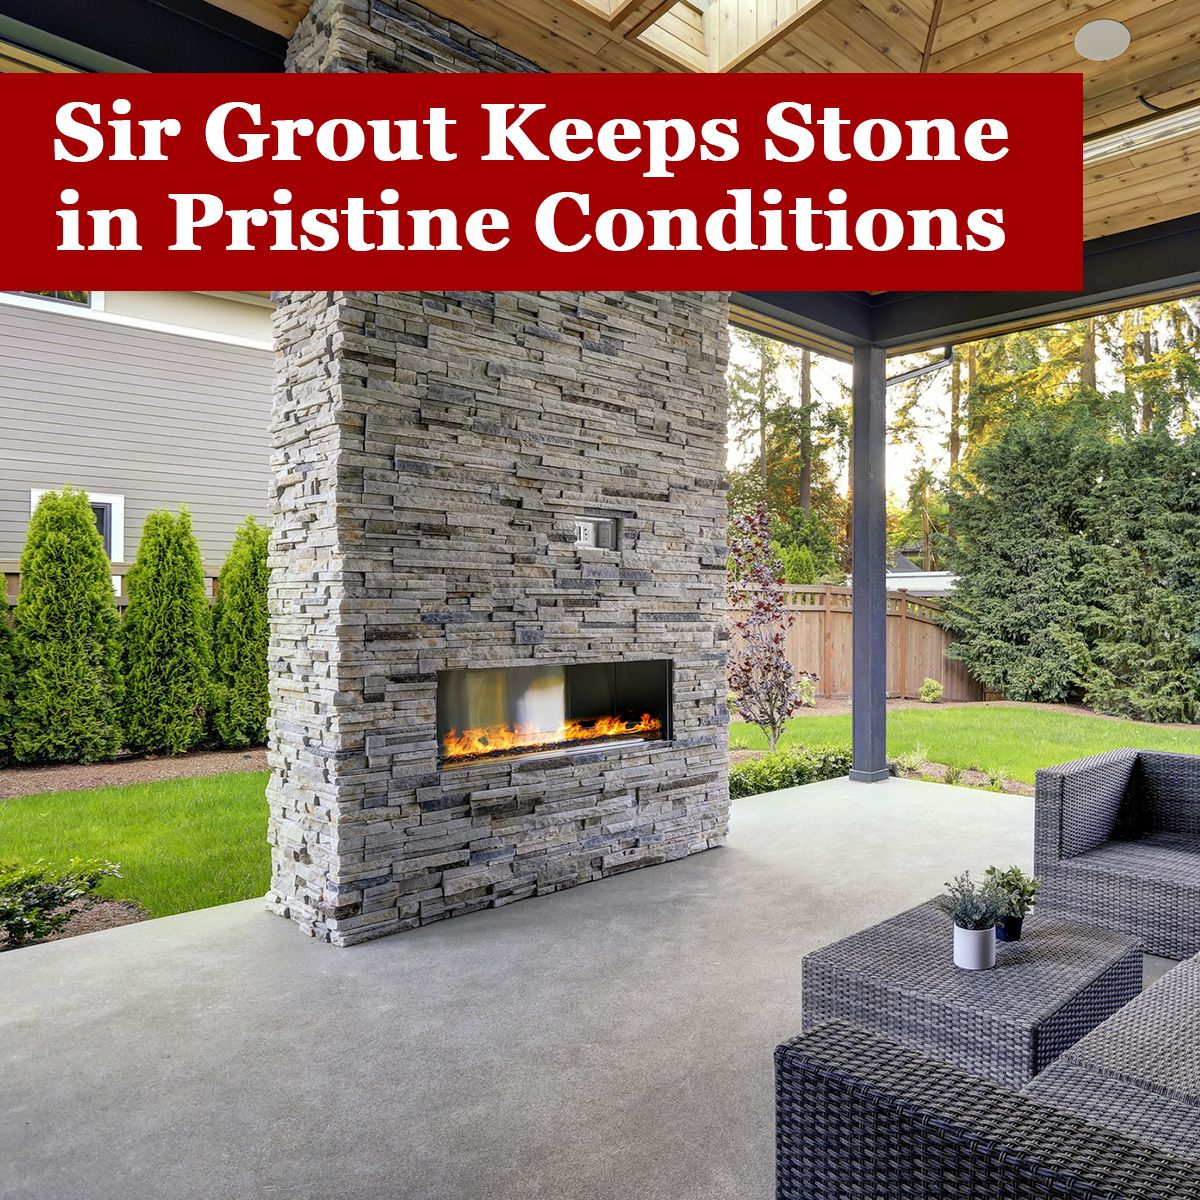 Sir Grout Keeps Stone in Pristine Conditions